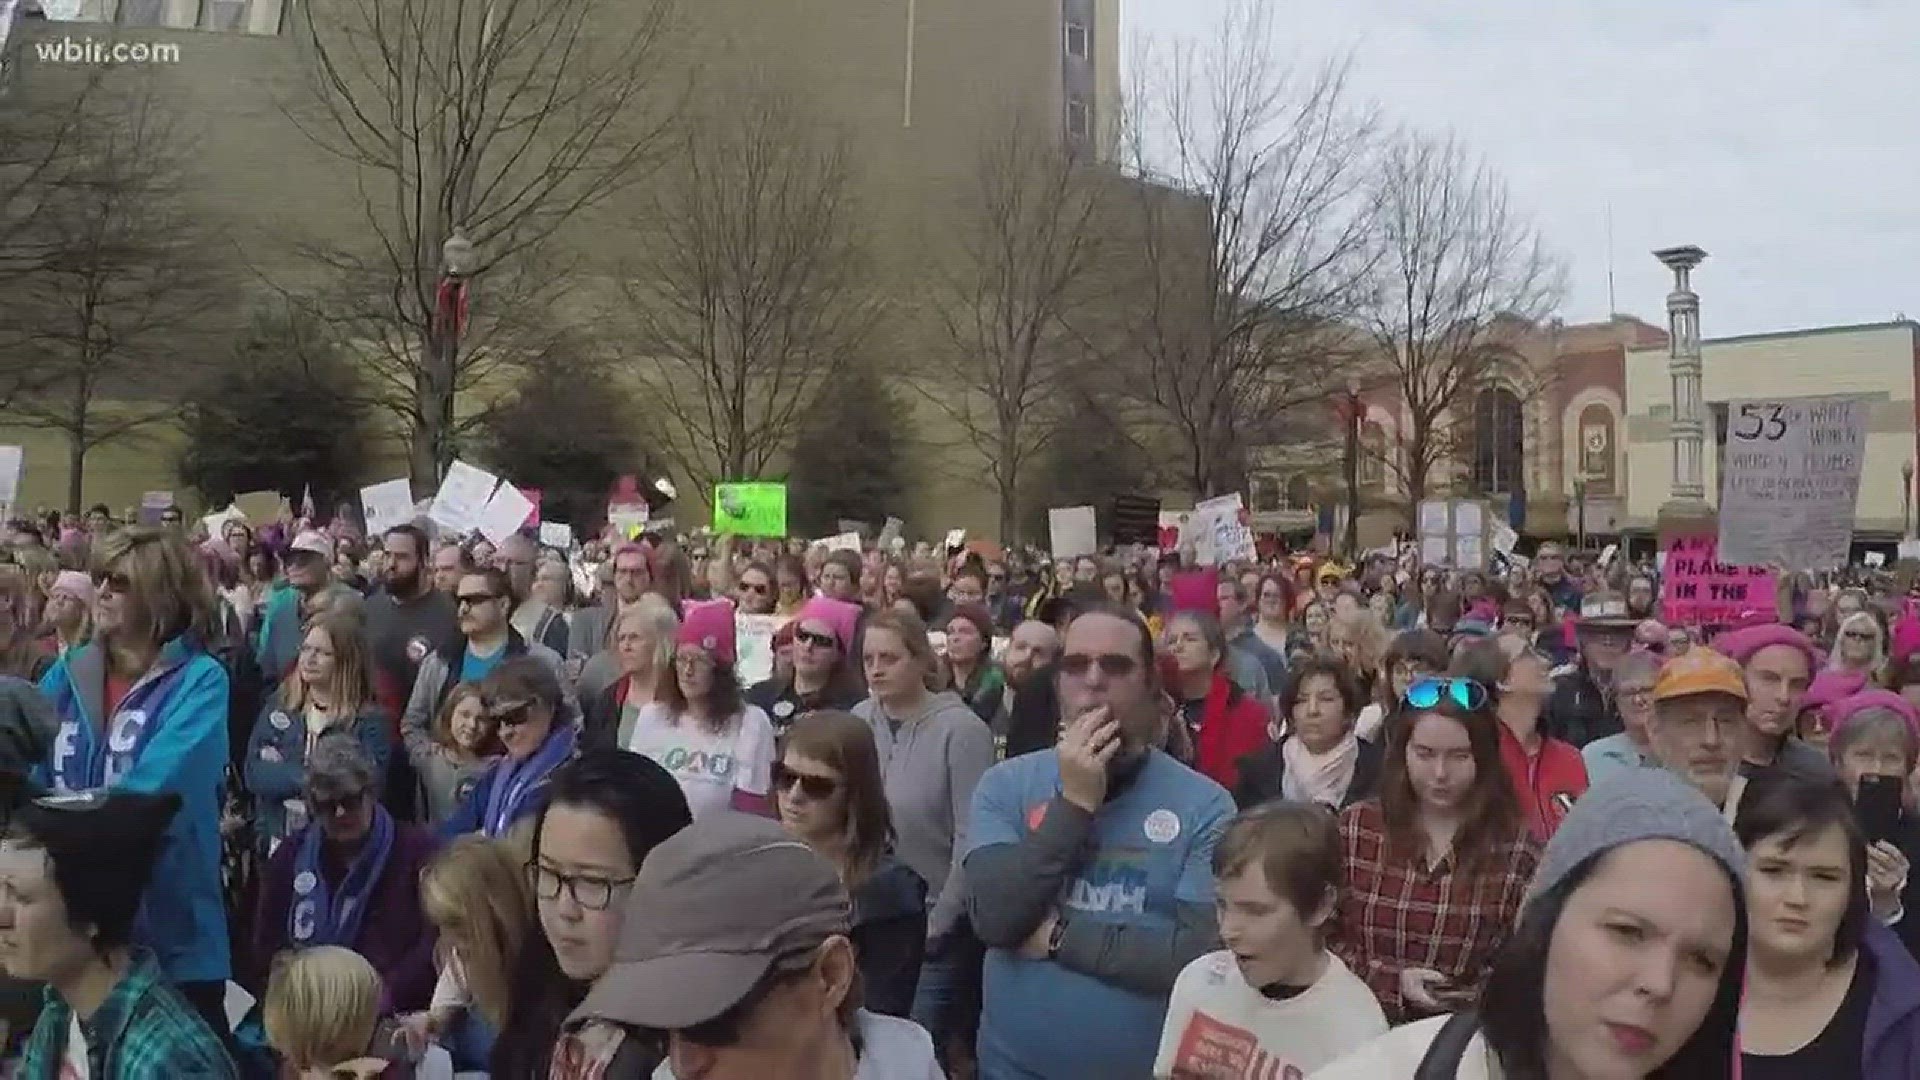 Jan. 22, 2018: After 14,000 people turned out to the Women's March in downtown Knoxville, many viewers posted questions on our Facebook page about the size of the crowd and the cause. KPD backs up their crowd estimate.